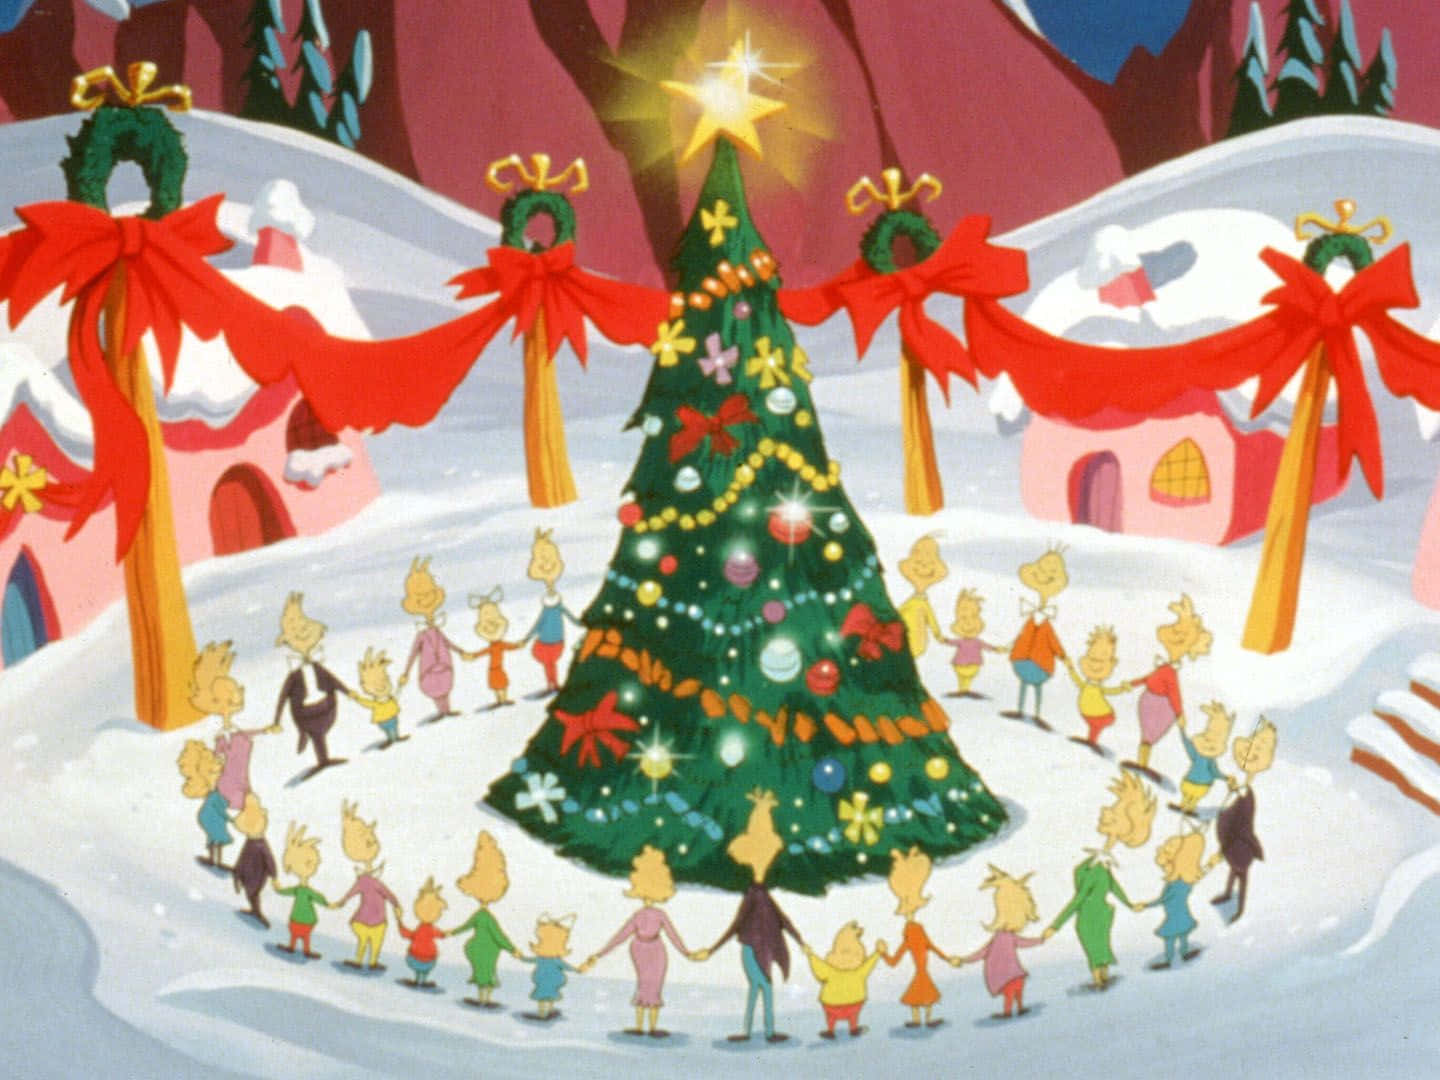 A Cartoon Christmas Tree With People Around It Wallpaper